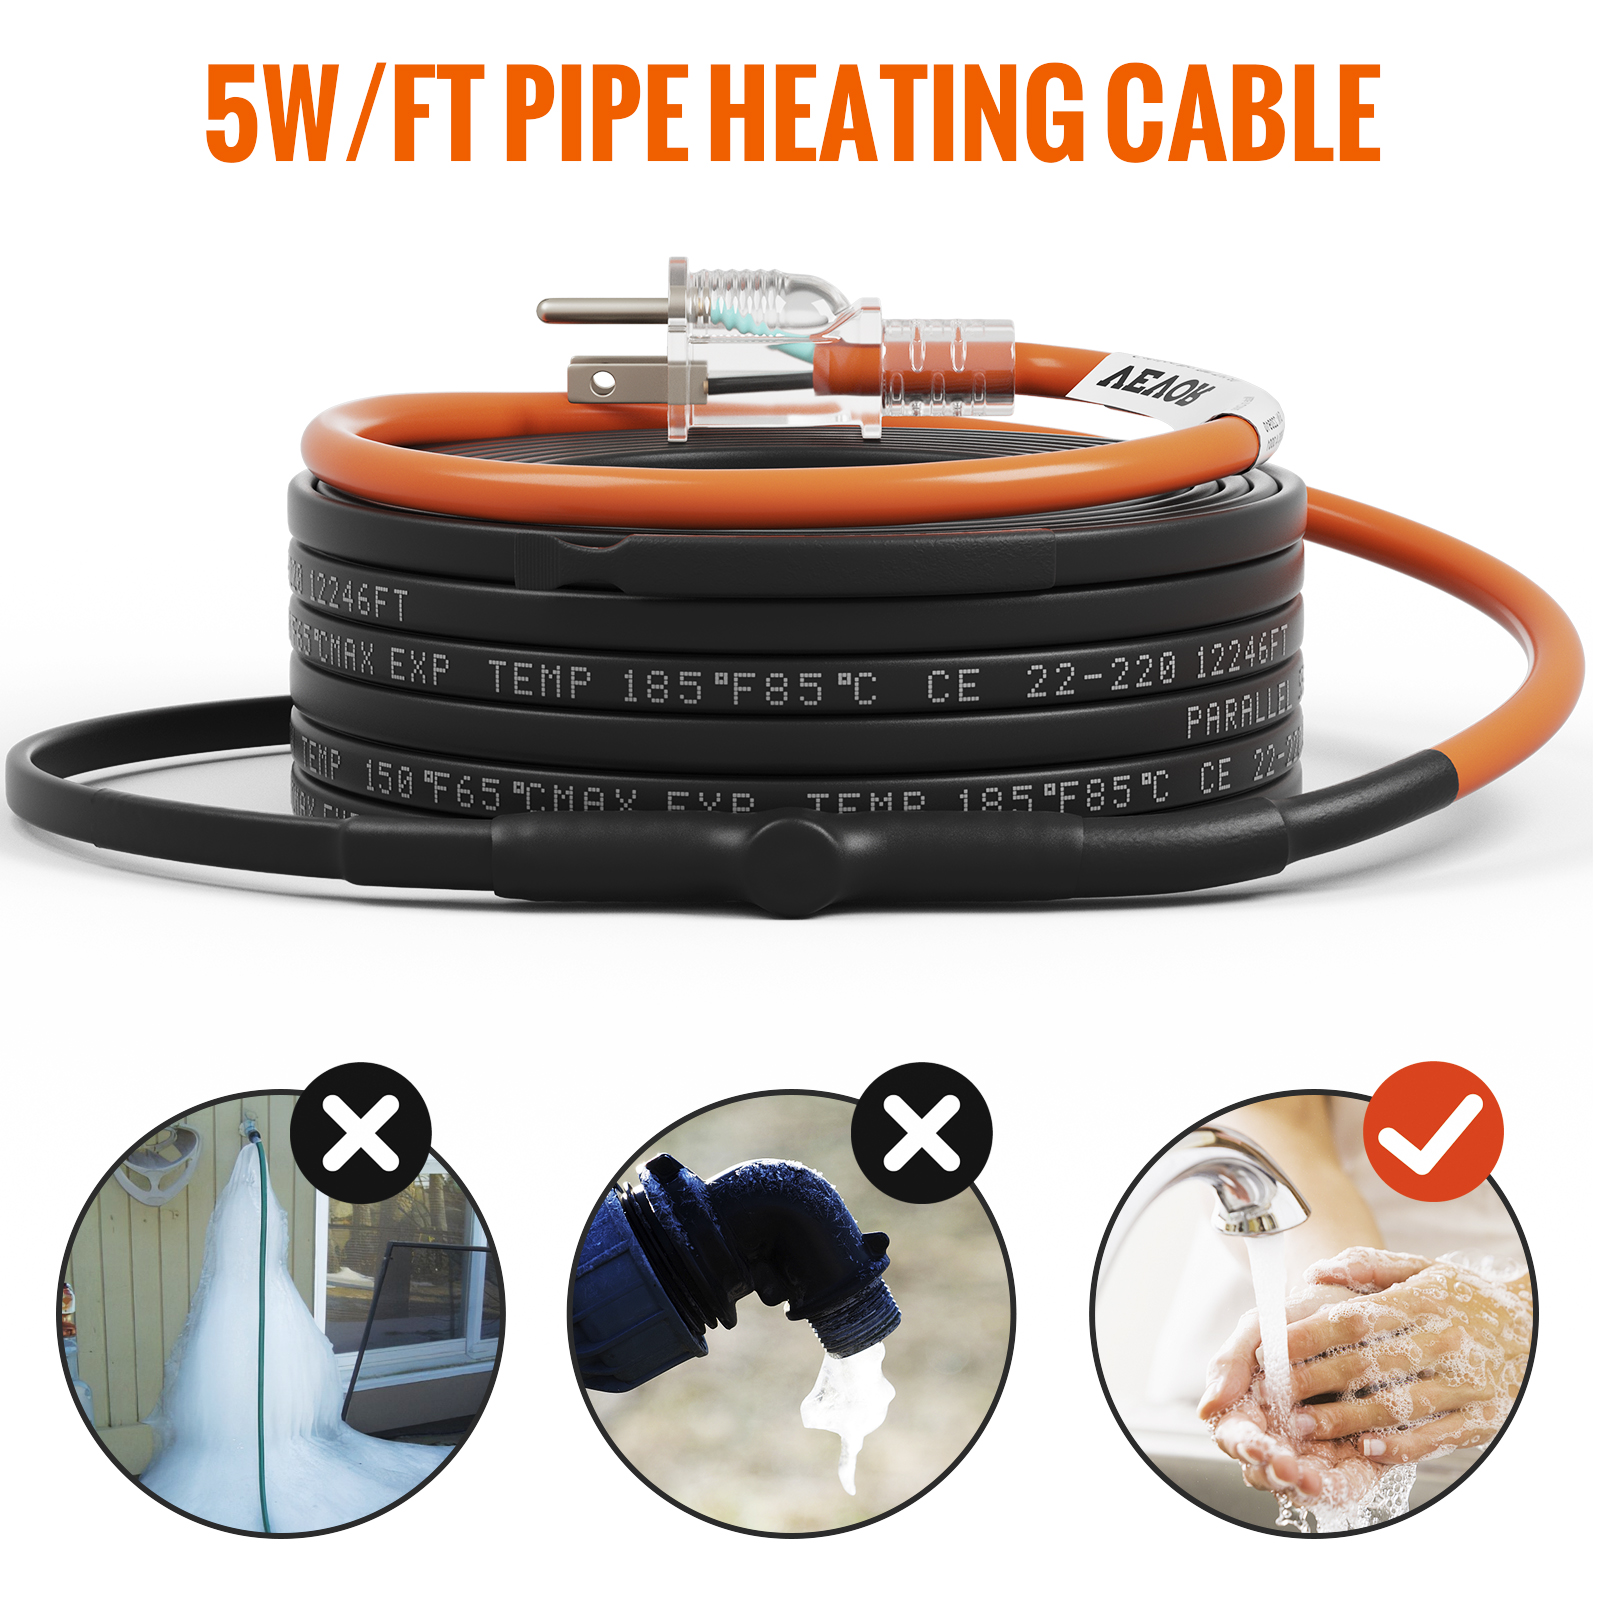 Heat Tape for Pipes, Heating Cable for Pipes